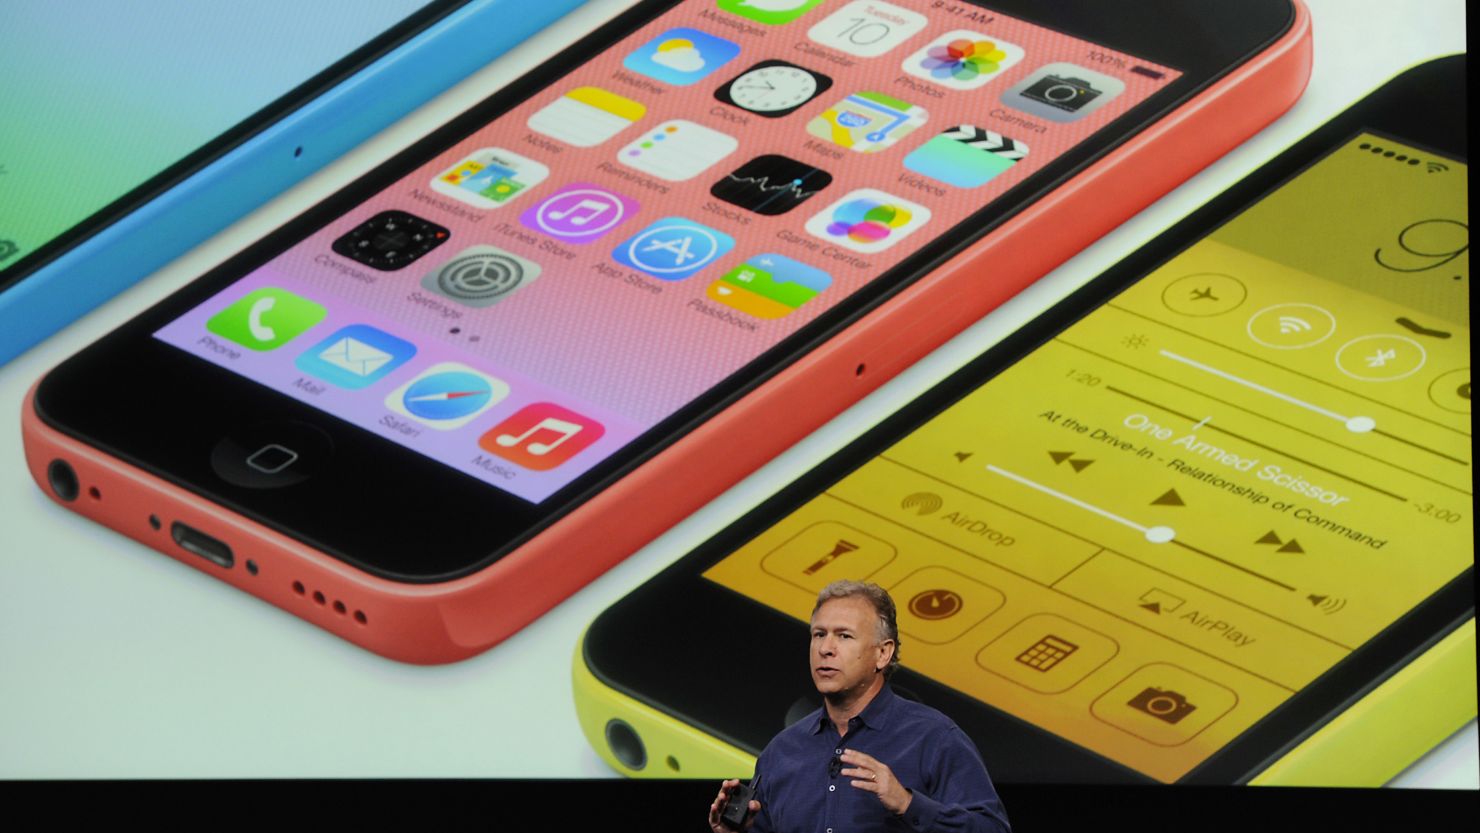 Apple's Phil Schiller presents the iPhone 5C, a cheaper, simpler version of the phone, at a September event.